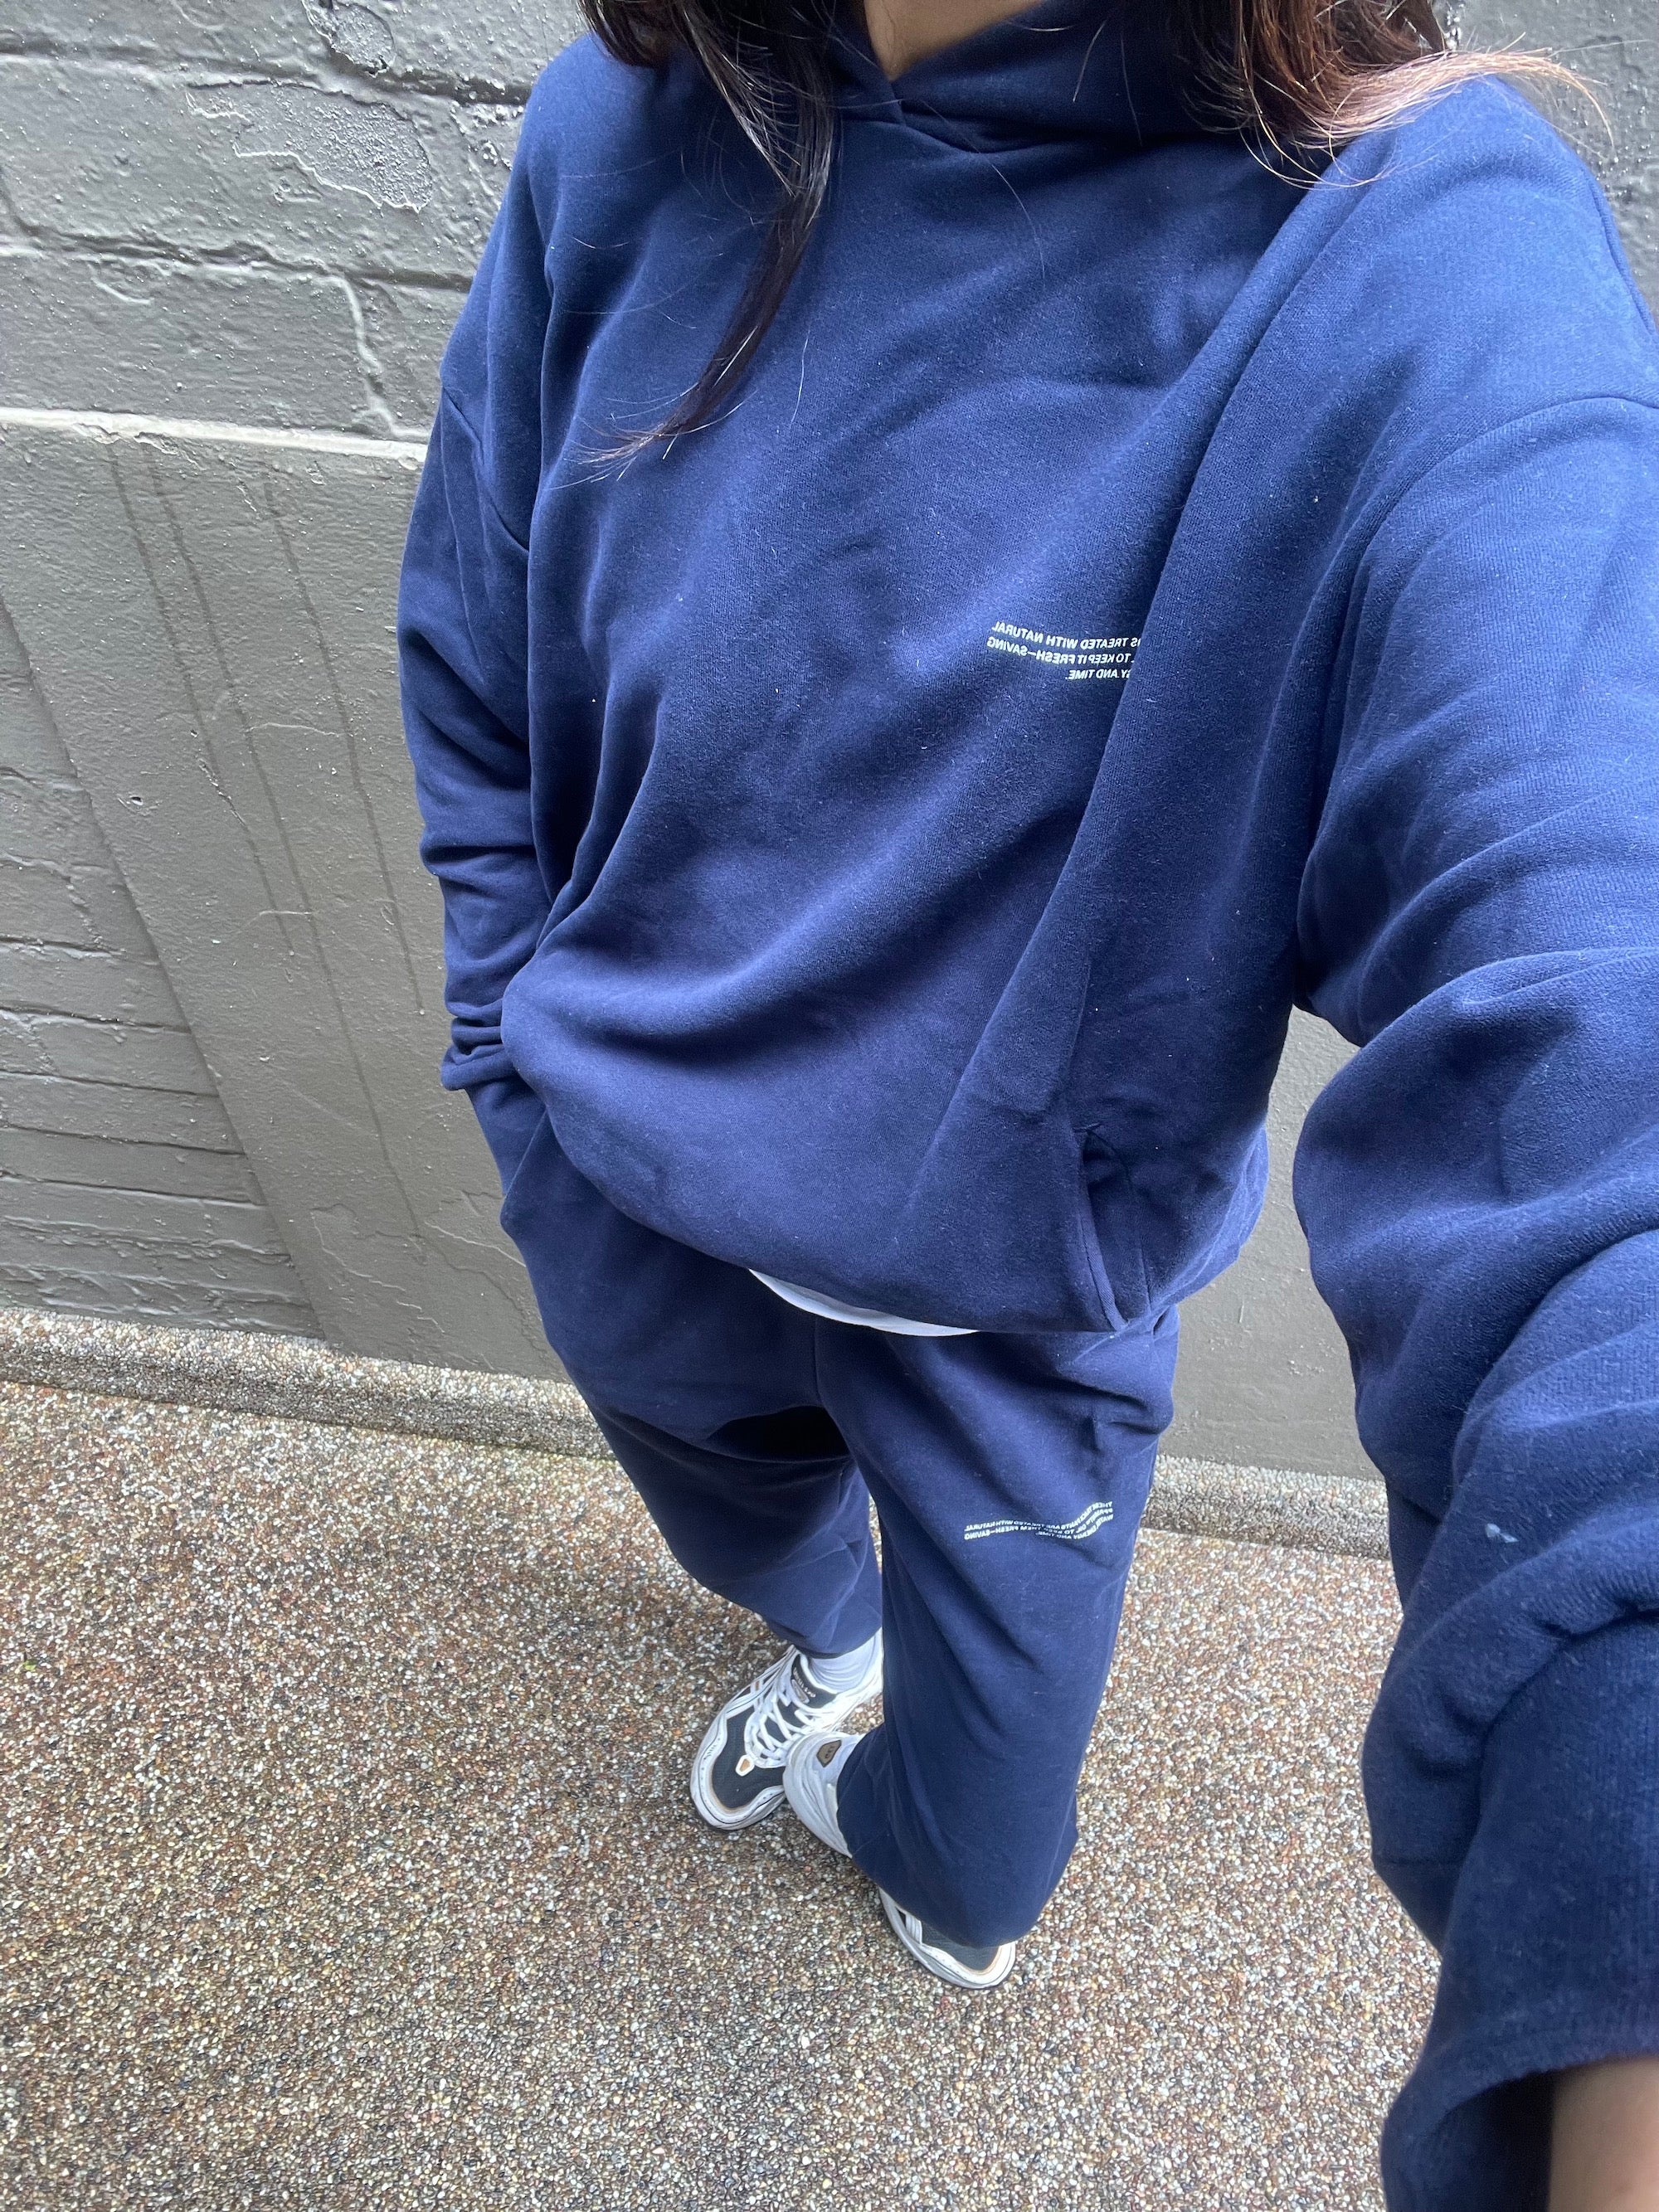 We Tried Out PANGAIA's Sweats — Is The Hype Real?